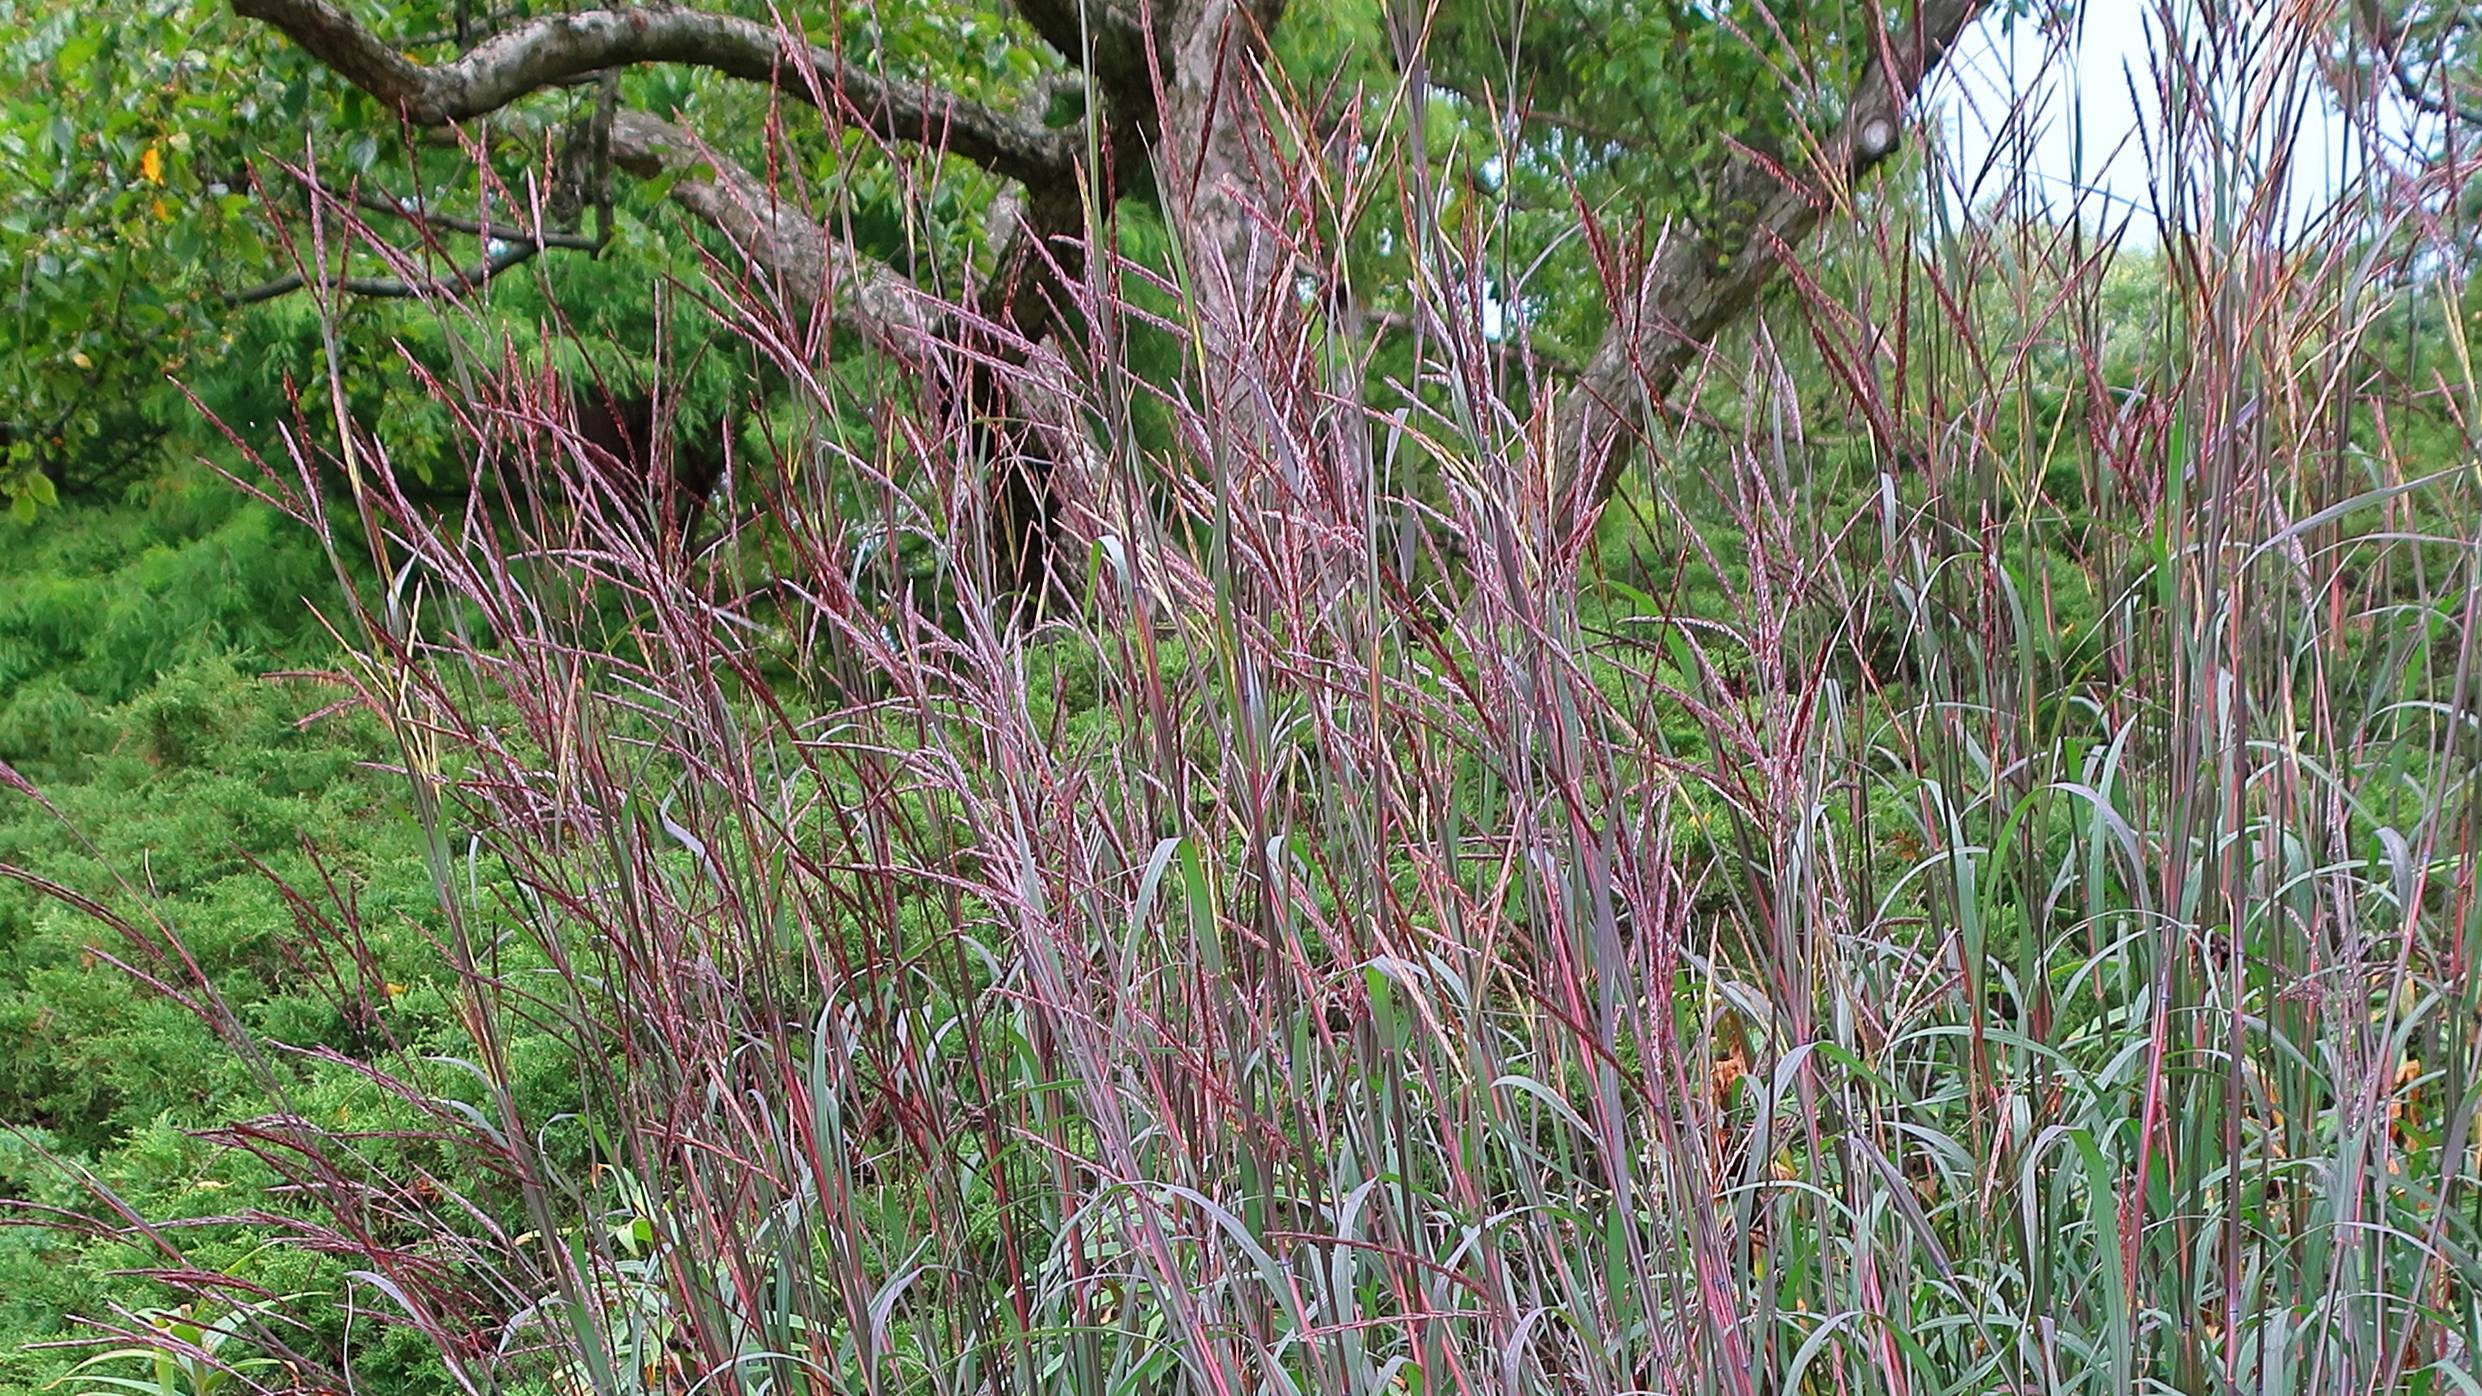 red-burgundy foliage and stems